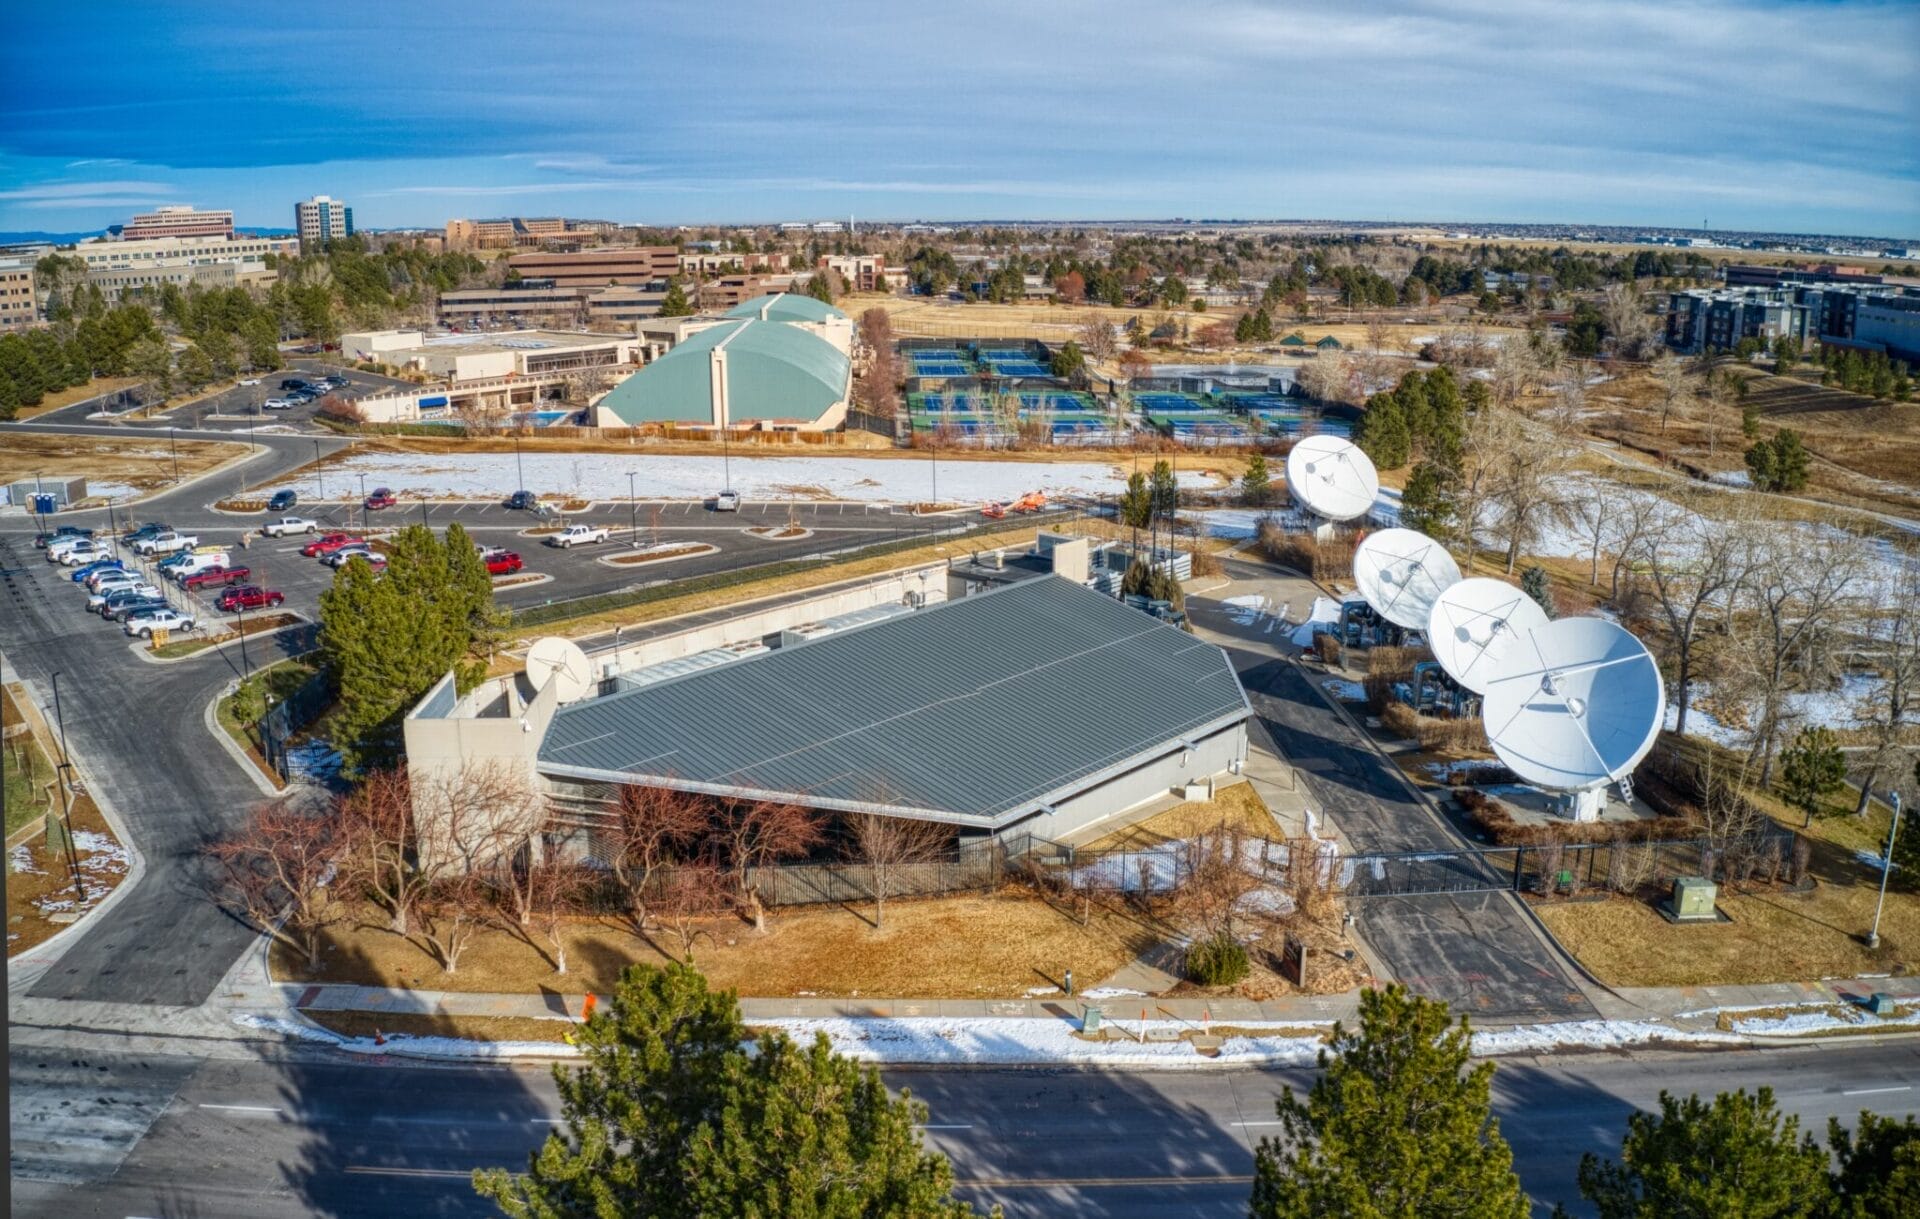 Aerial view of the DIRECTV Data Center Portfolio with buildings, satellite dishes, and a parking area, partially covered in snow.